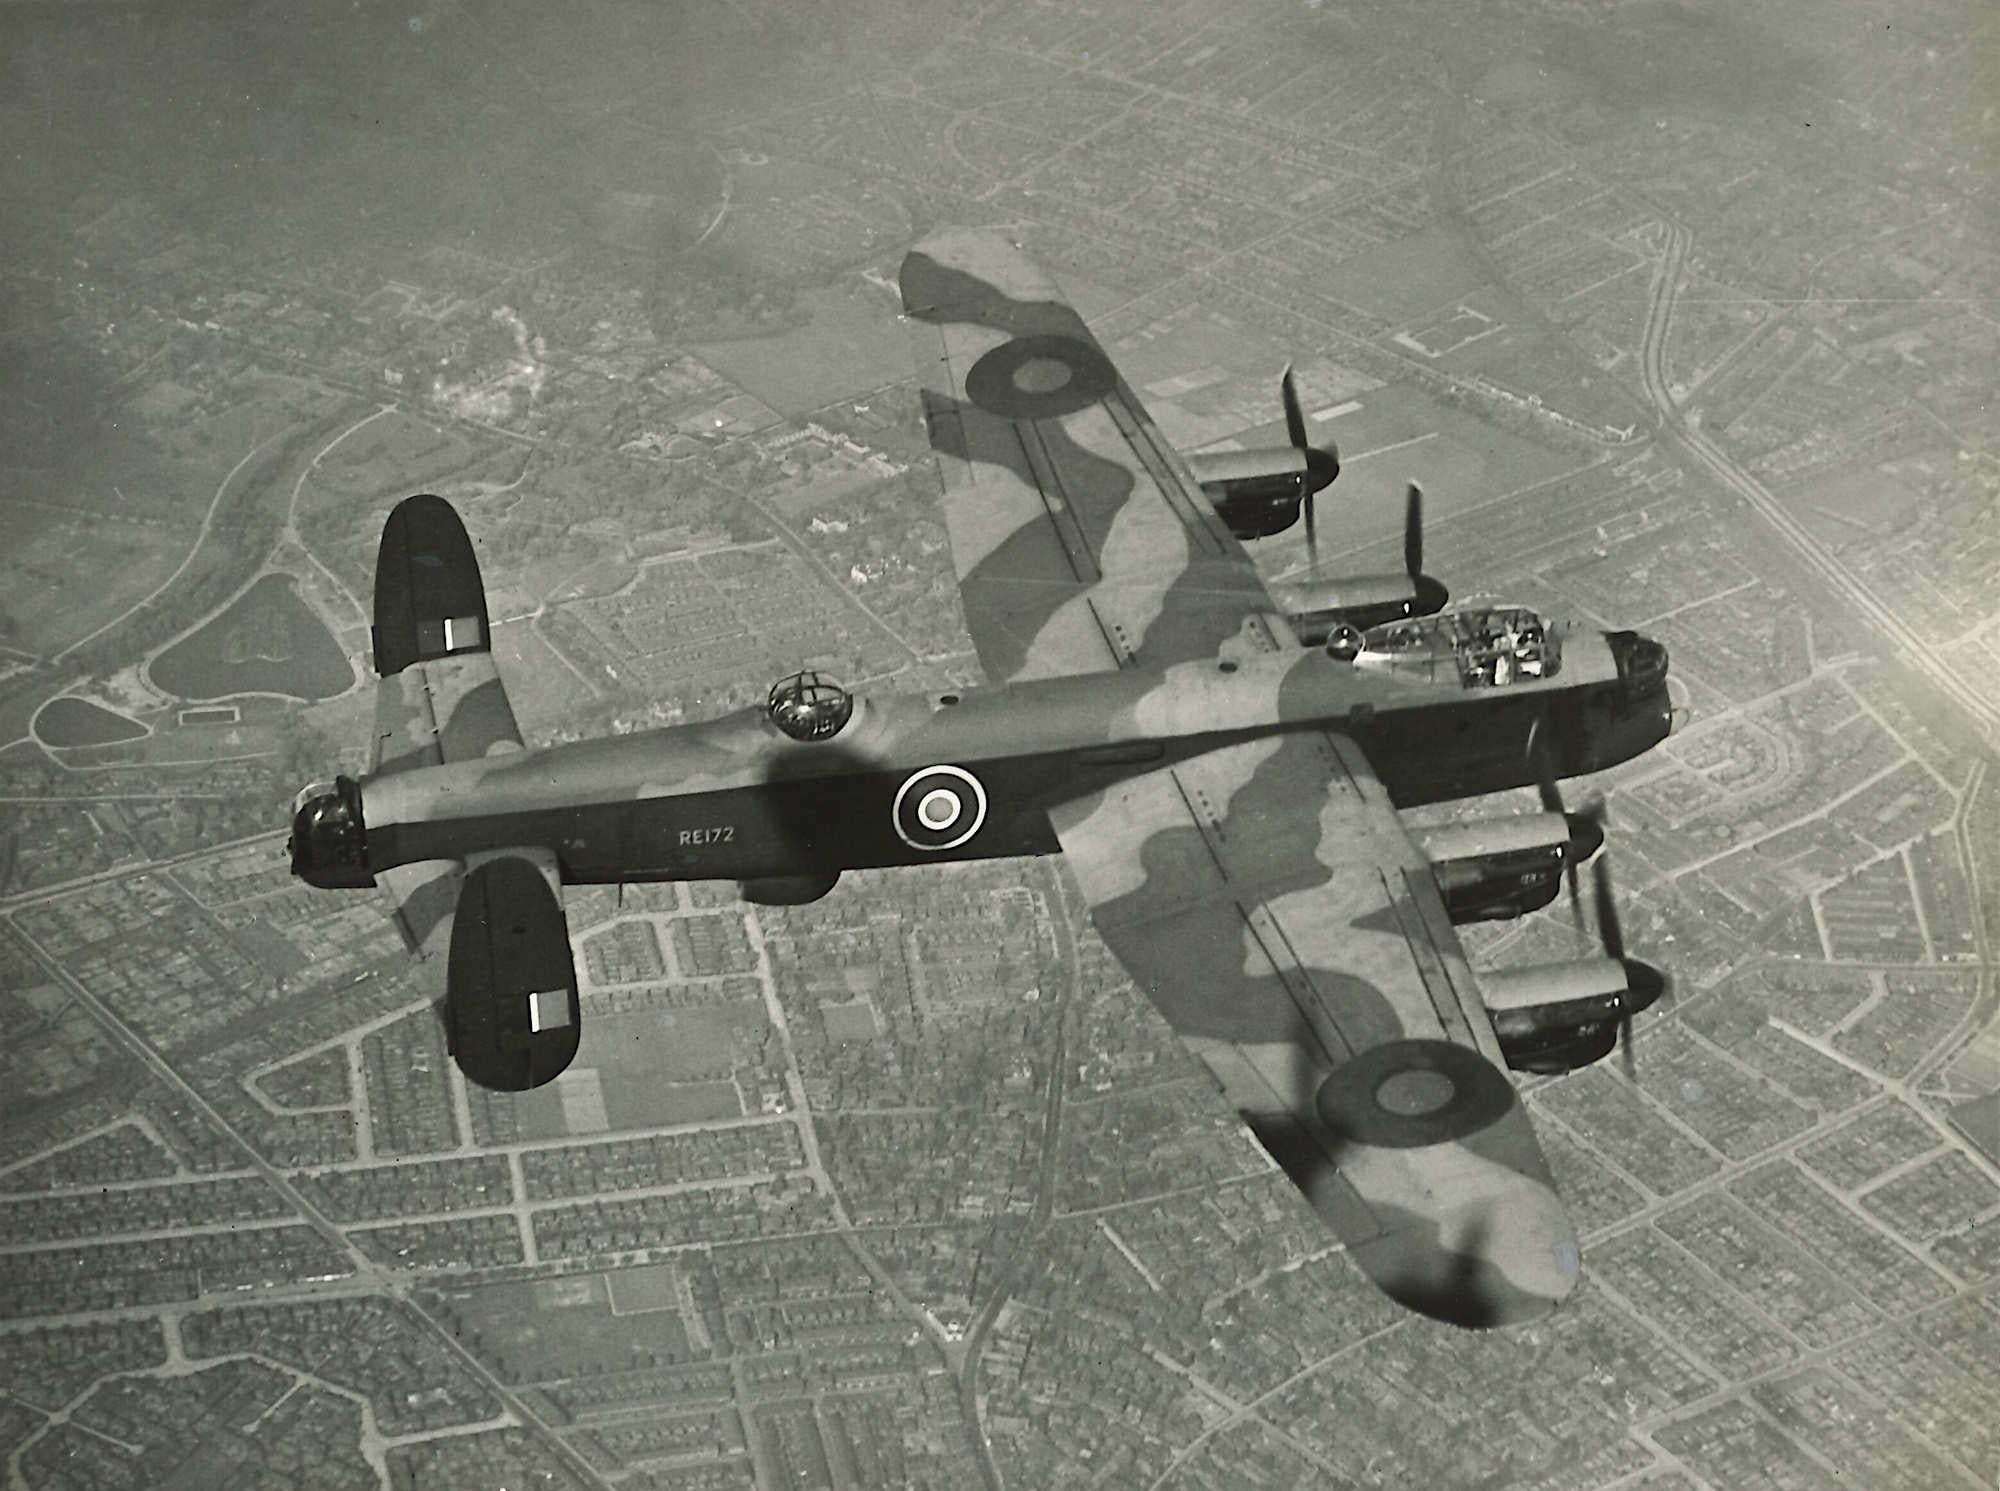 Unknown Black and White Photograph - RAF Avro Lancaster Bomber photograph from A V Roe Mk III RE172 flying